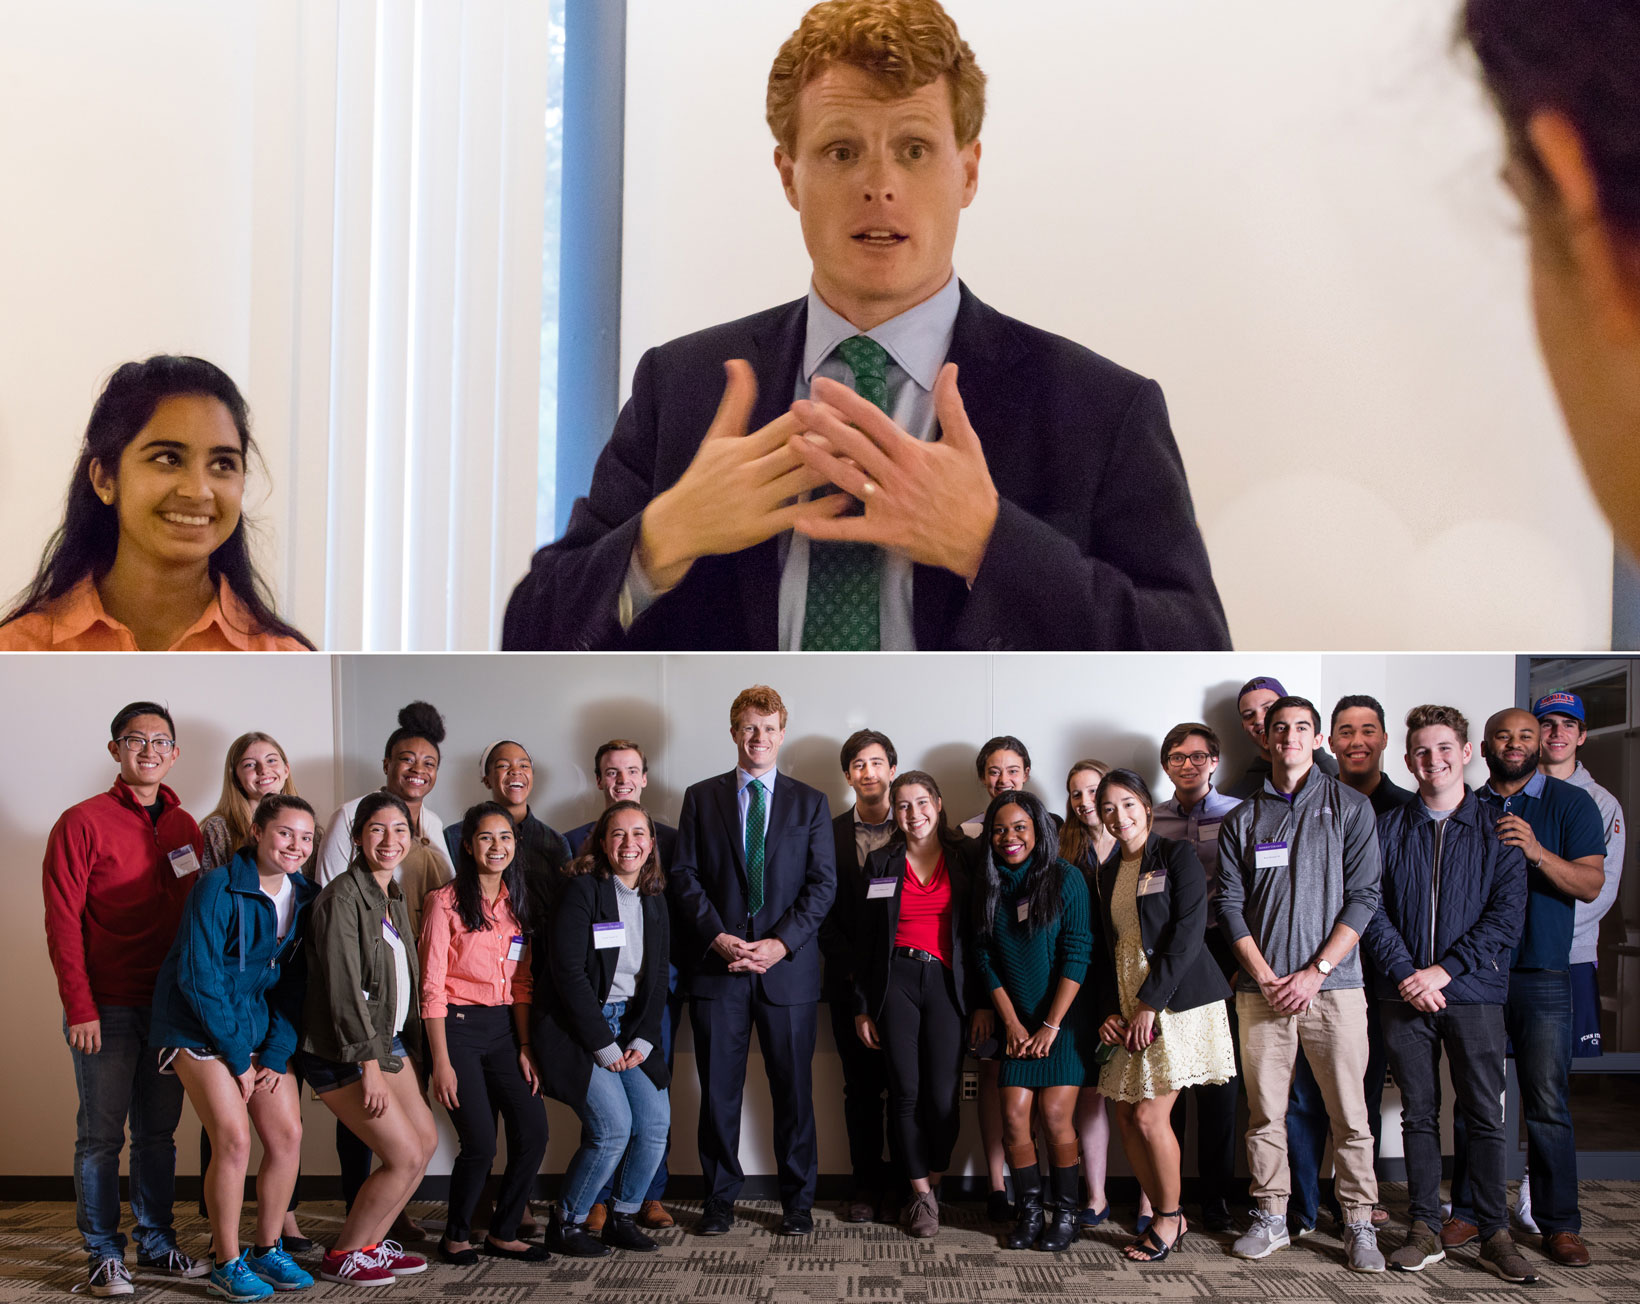 Joseph Kennedy meets with Amherst student.